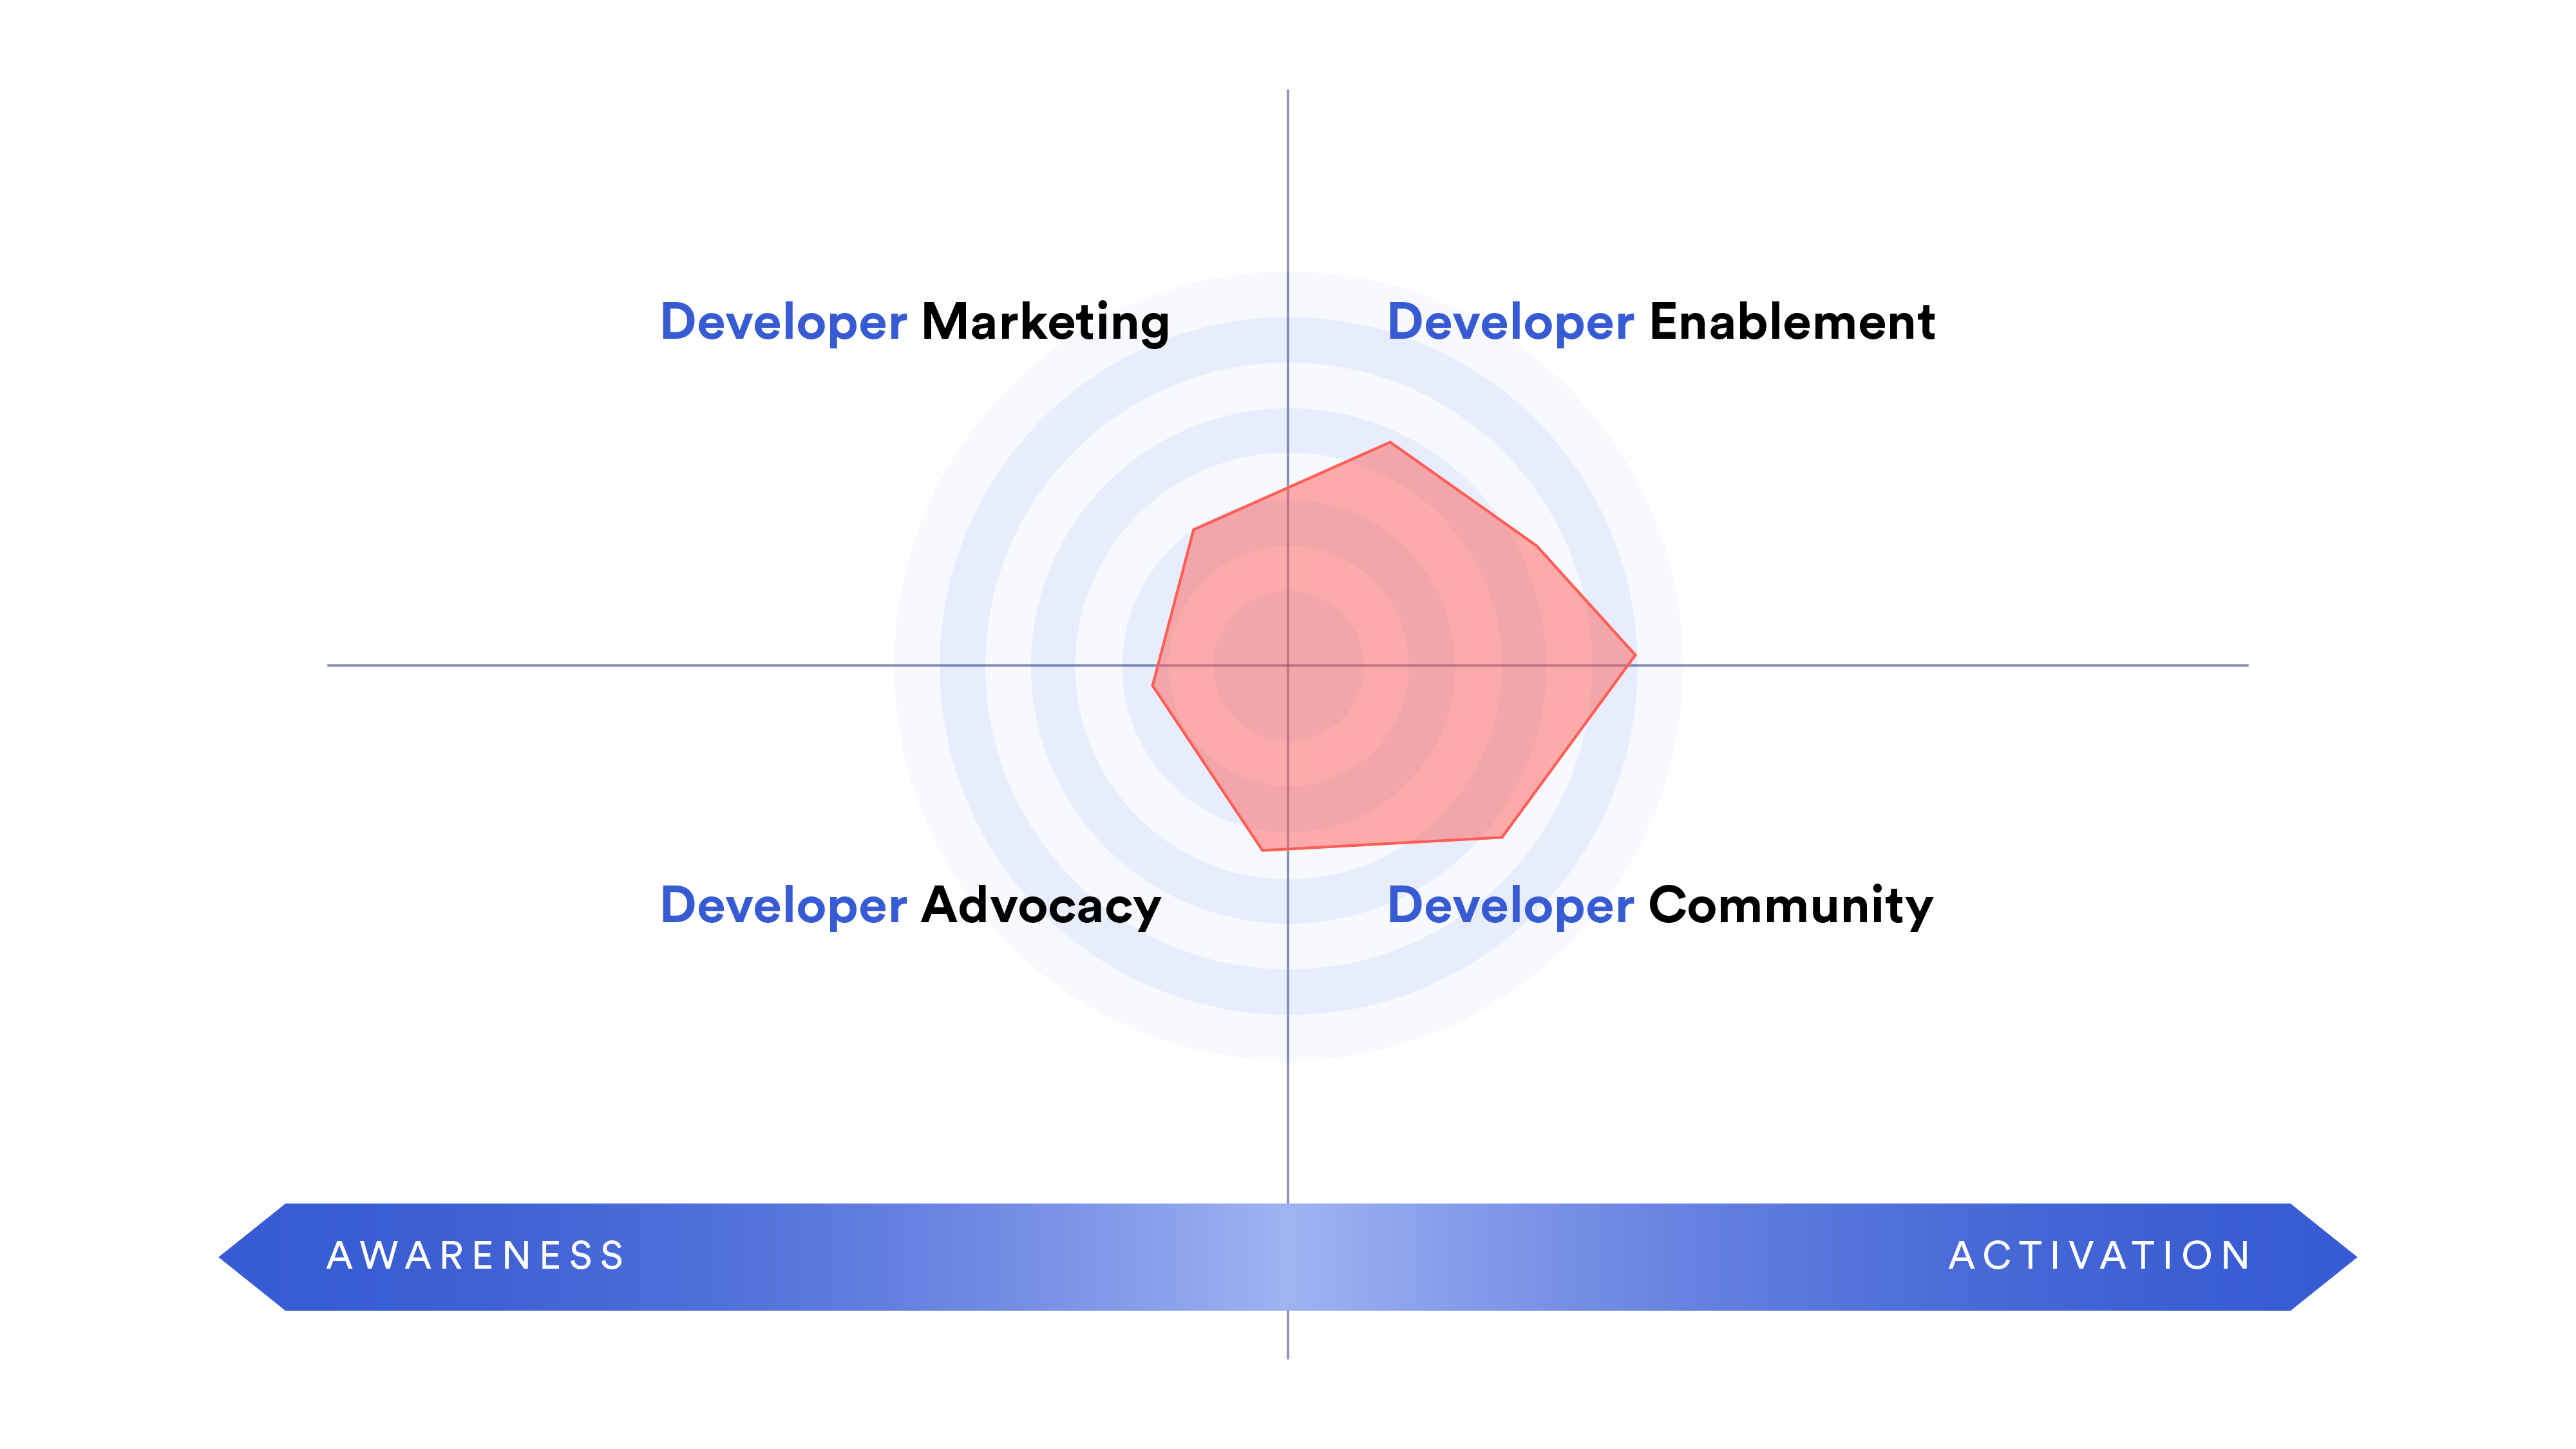 A radar chart depicting the DevRel focus areas for an early-stage startup